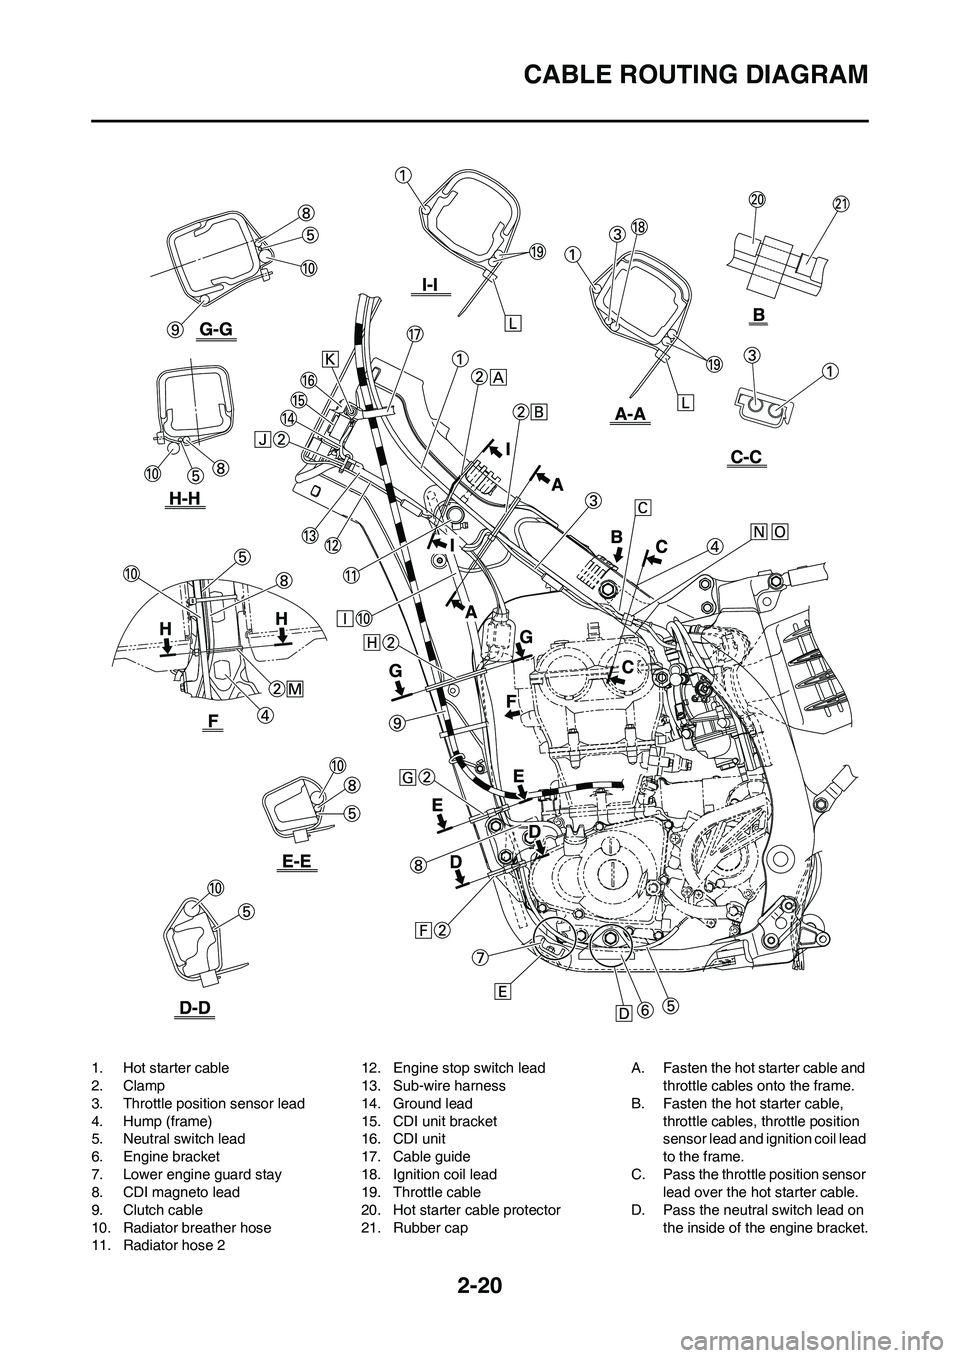 YAMAHA YZ450F 2009 Service Manual 2-20
CABLE ROUTING DIAGRAM
1. Hot starter cable
2. Clamp
3. Throttle position sensor lead
4. Hump (frame)
5. Neutral switch lead
6. Engine bracket
7. Lower engine guard stay
8. CDI magneto lead
9. Clu